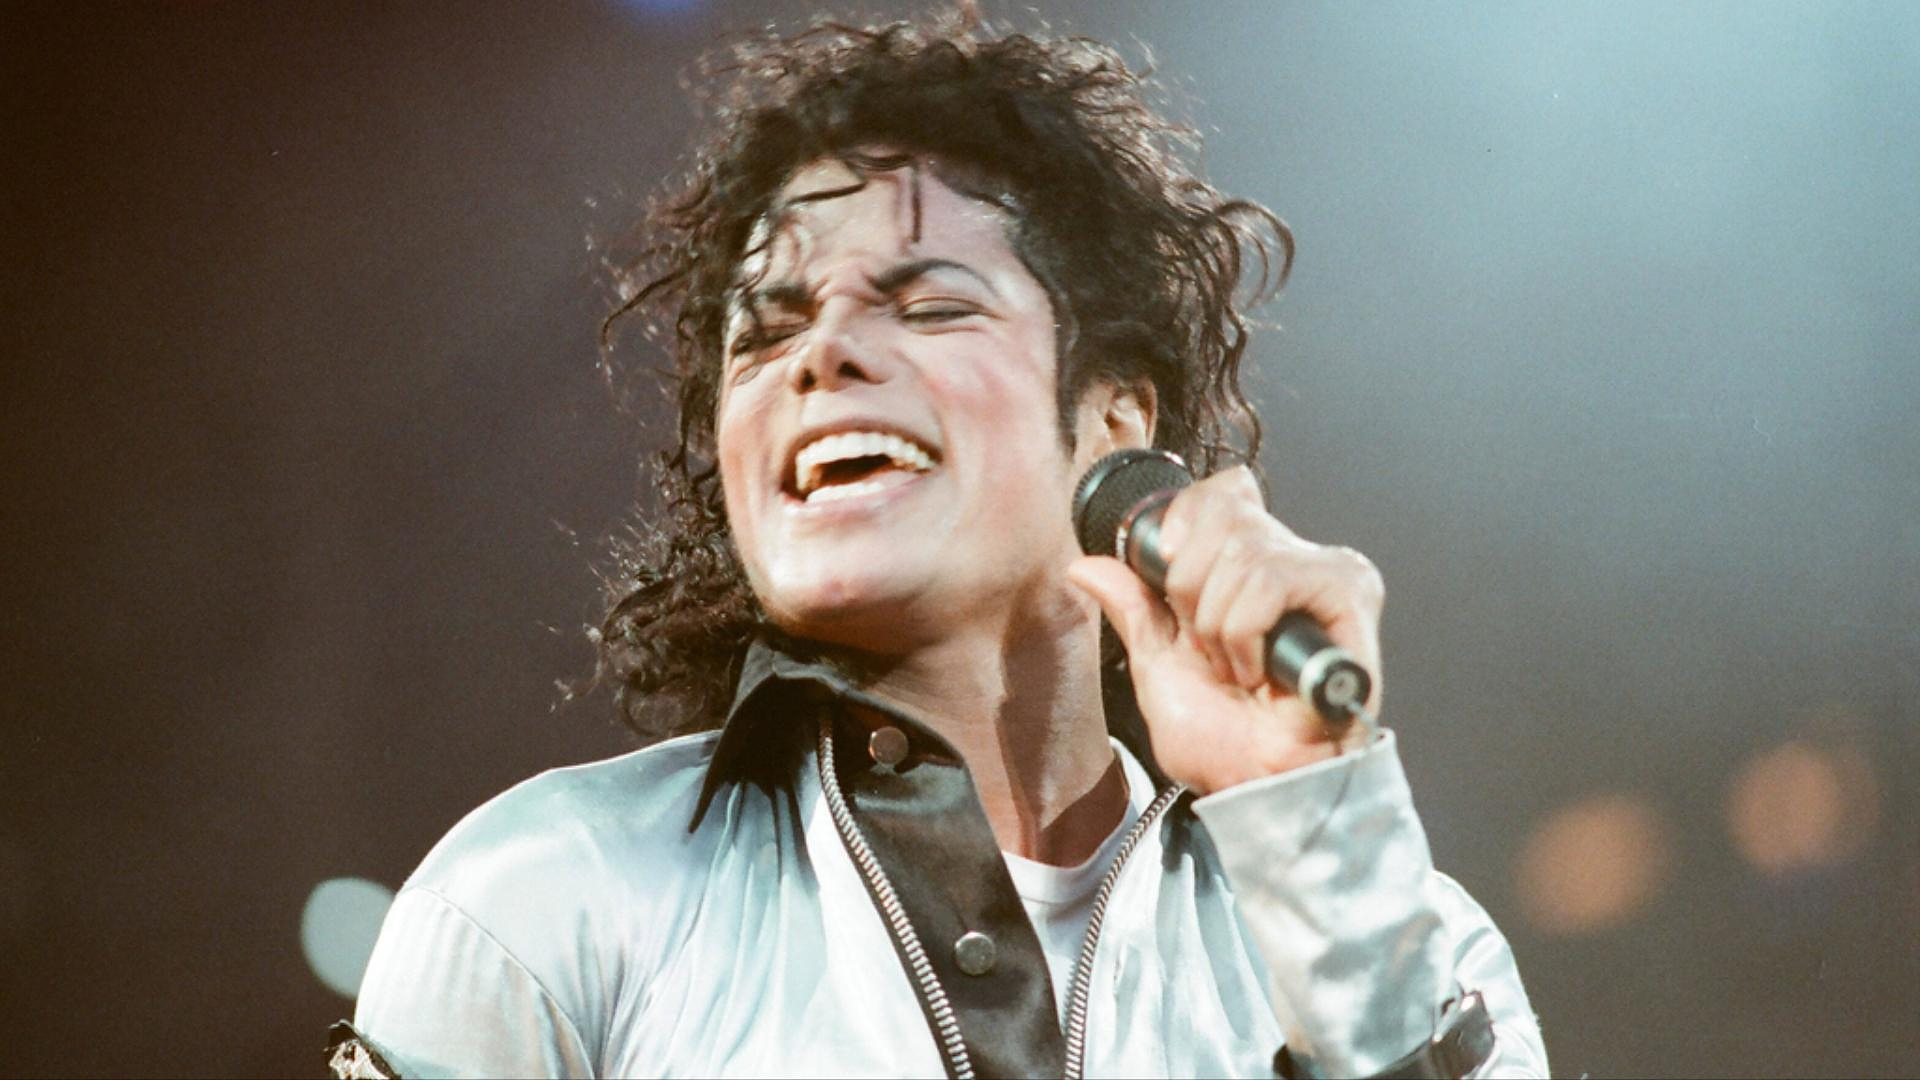 Sony Music buys half of Michael Jackson's catalog at a high price